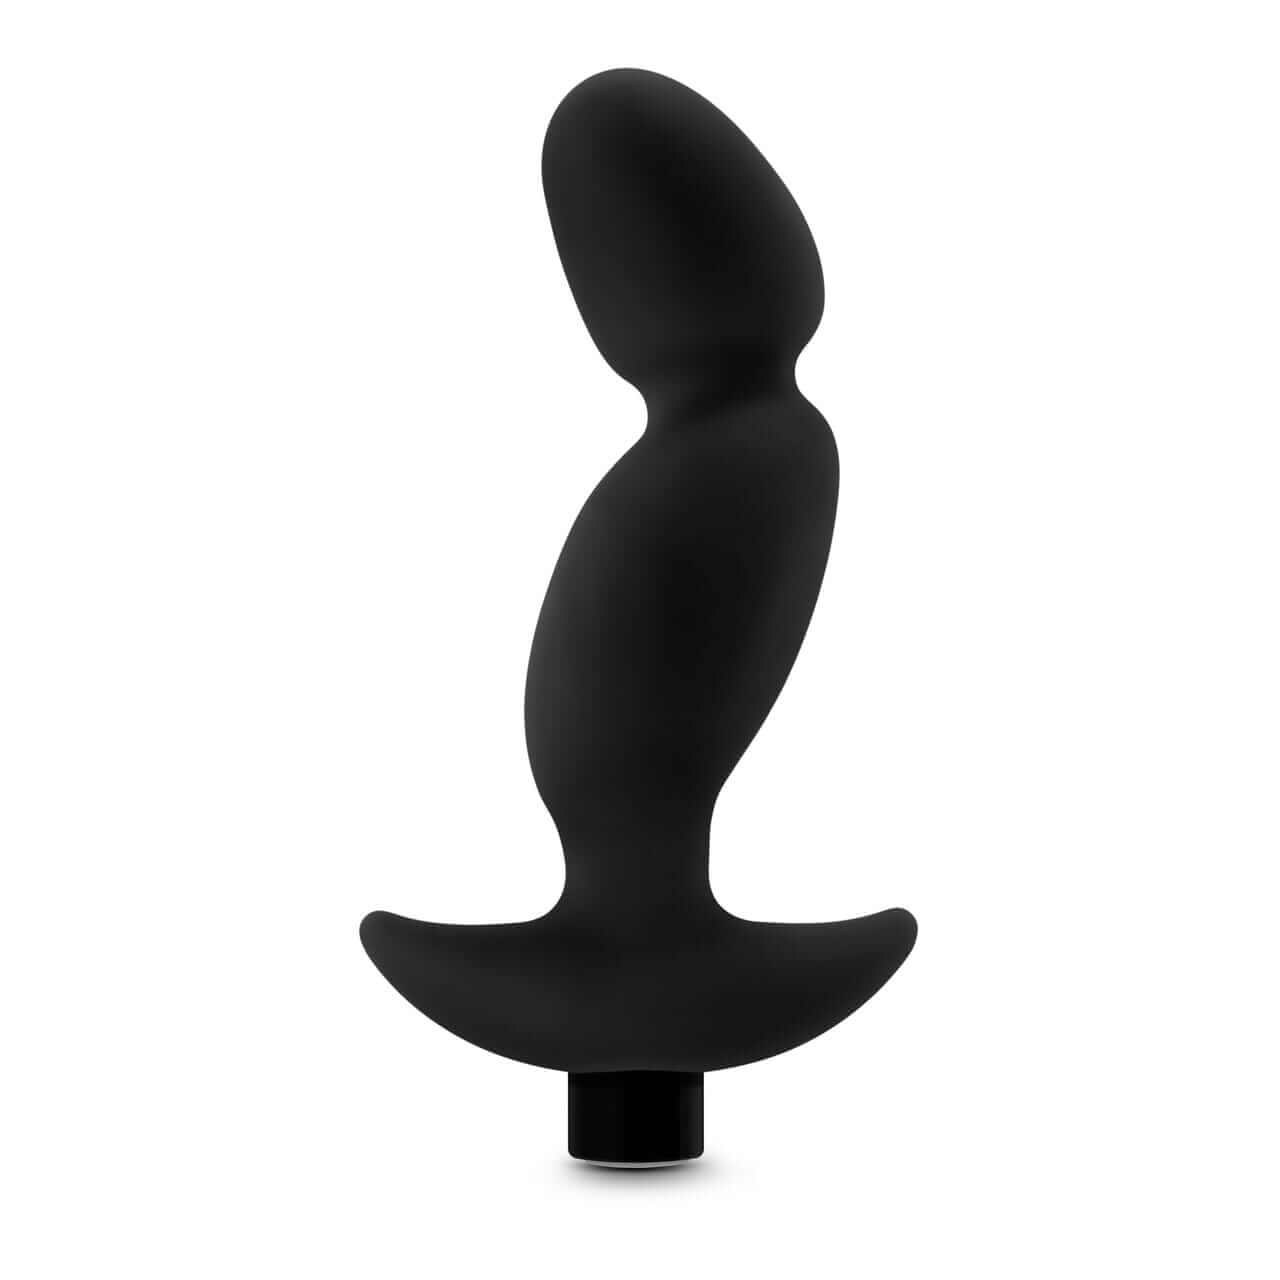 Silicone Vibrating Prostate Massager 04 - Black - Thorn & Feather Sex Toy Canada